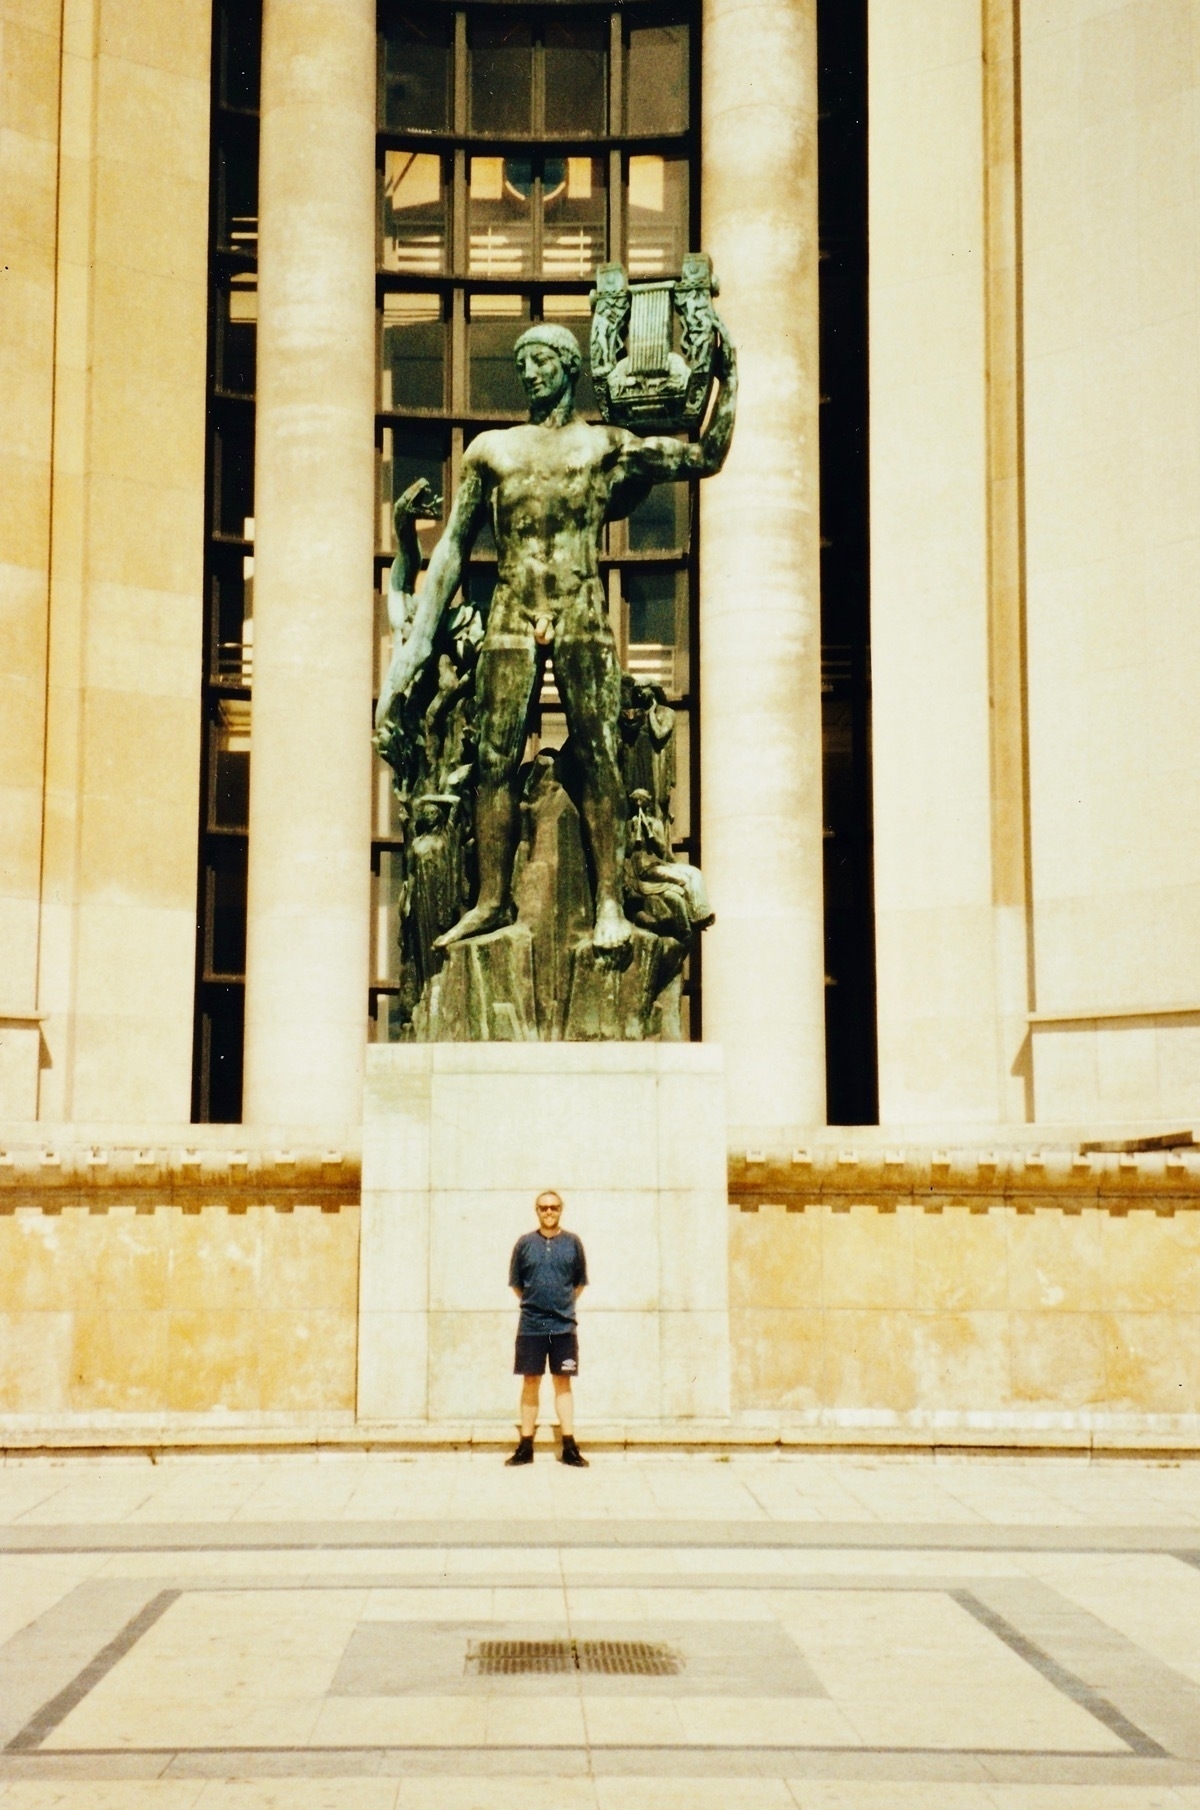 Man in shorts and t-shirt standing in front of a large bronze statue of Apollo